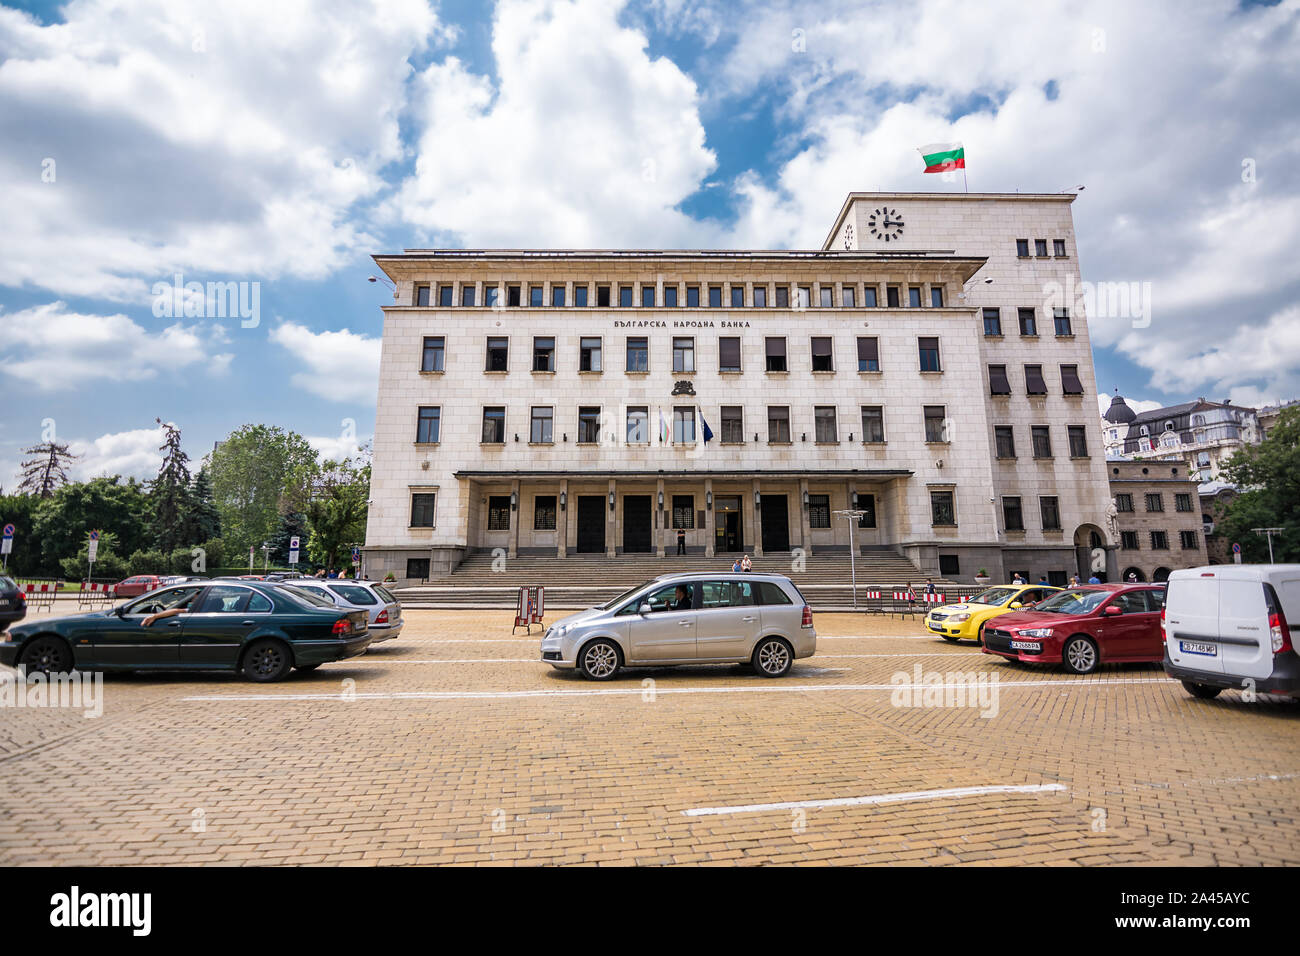 Sofia, Bulgaria - June 25, 2019: Car traffic in front of the building of the Bulgarian National Bank on a sunny day Stock Photo